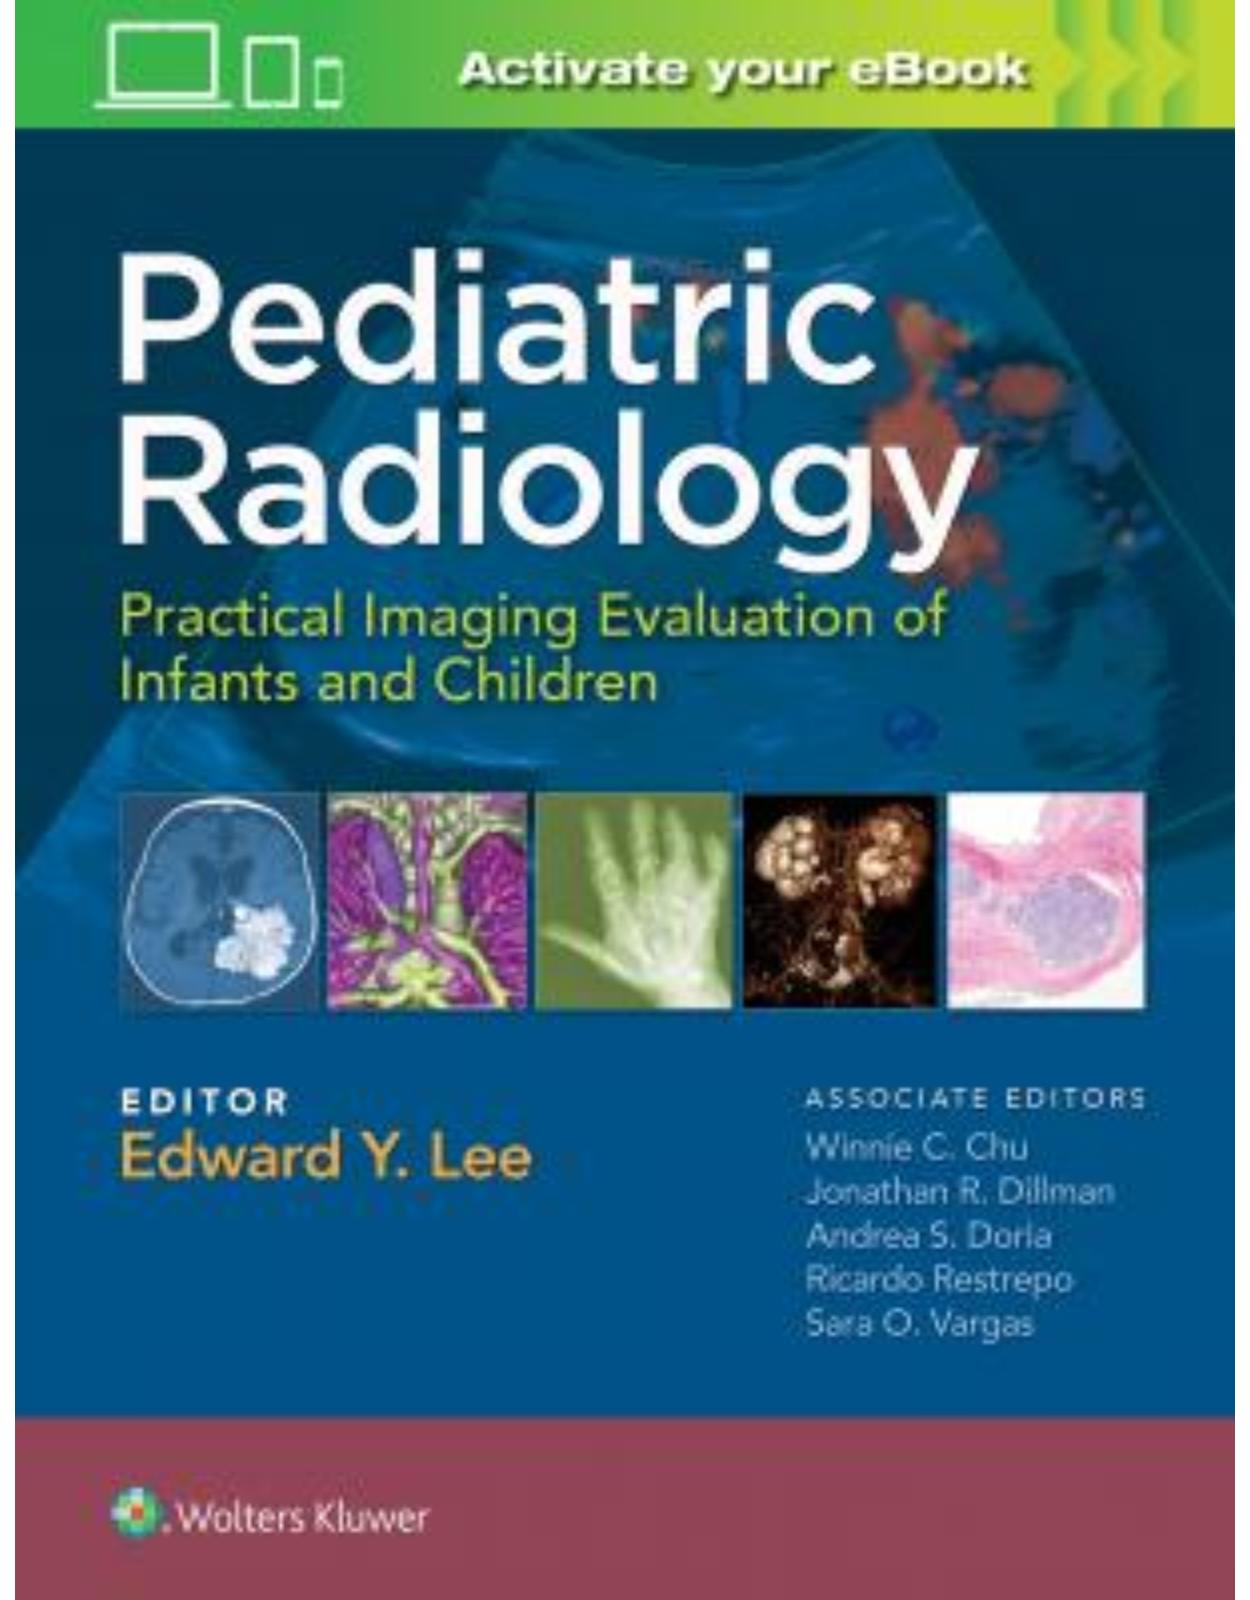 Pediatric Radiology: Practical Imaging Evaluation of Infants and Children 